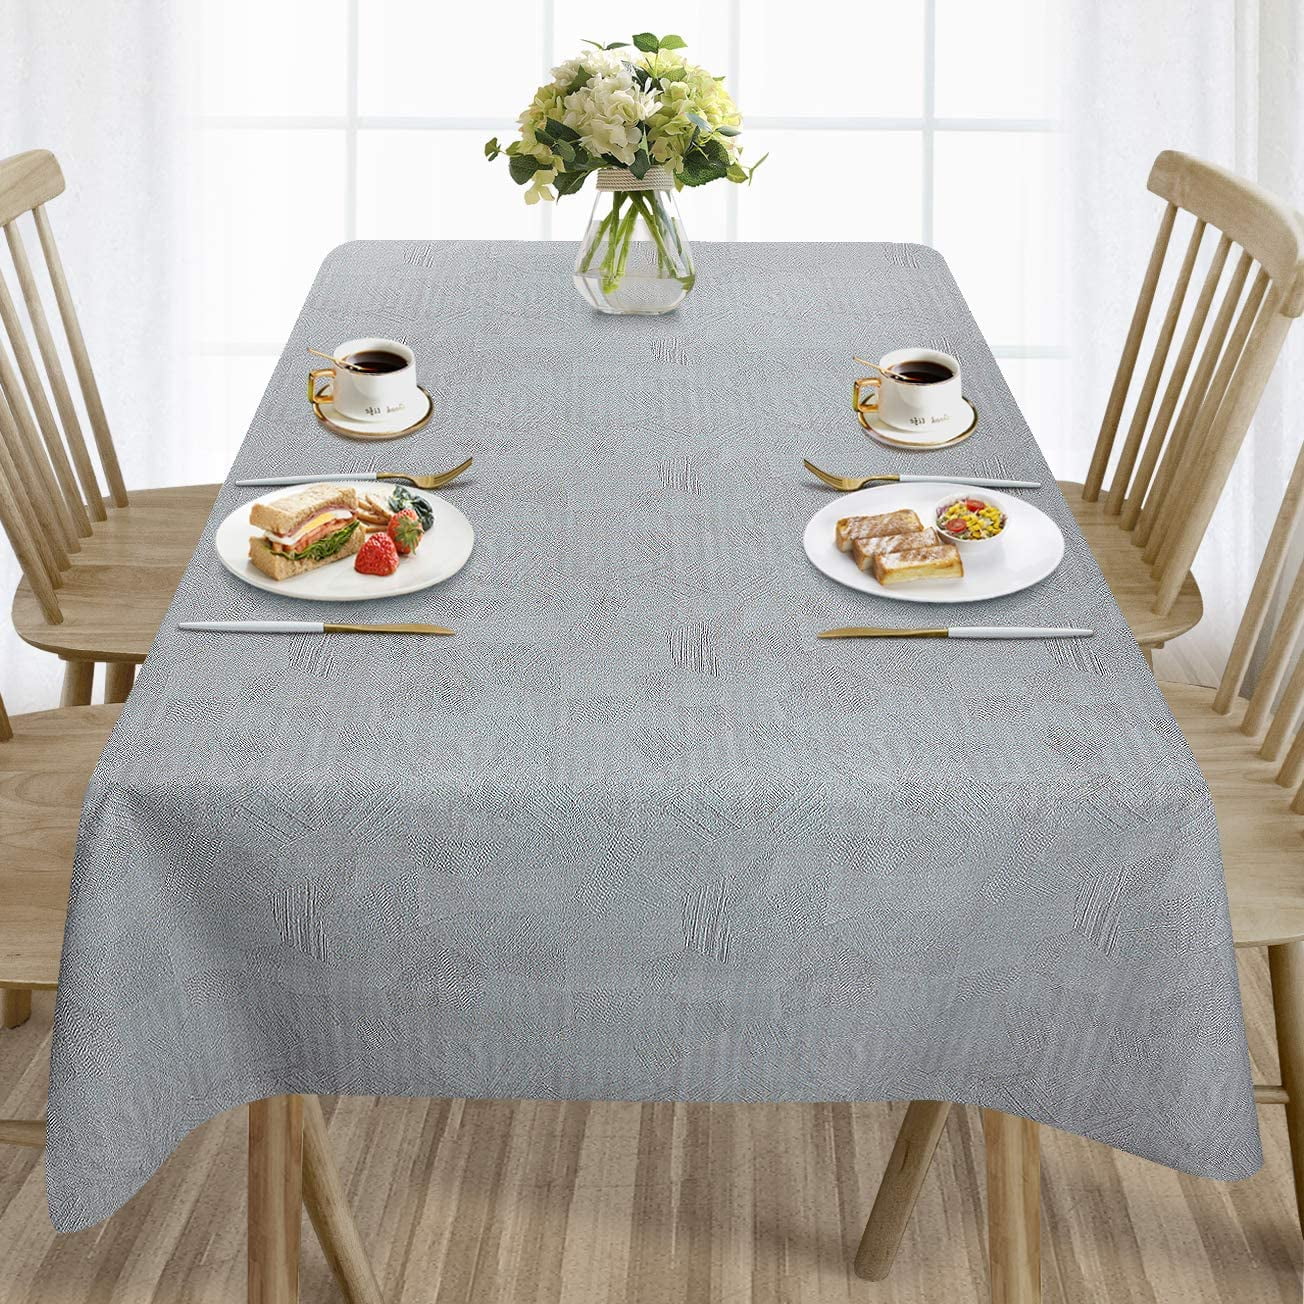 270 10 Seater Size Rectangle Table linen702 Vinyl Pvc Tablecloth Silver/Grey and Gold Leaf on White 3 metres Wipe Clean Textile Backed plastic table cloth 300x137cm